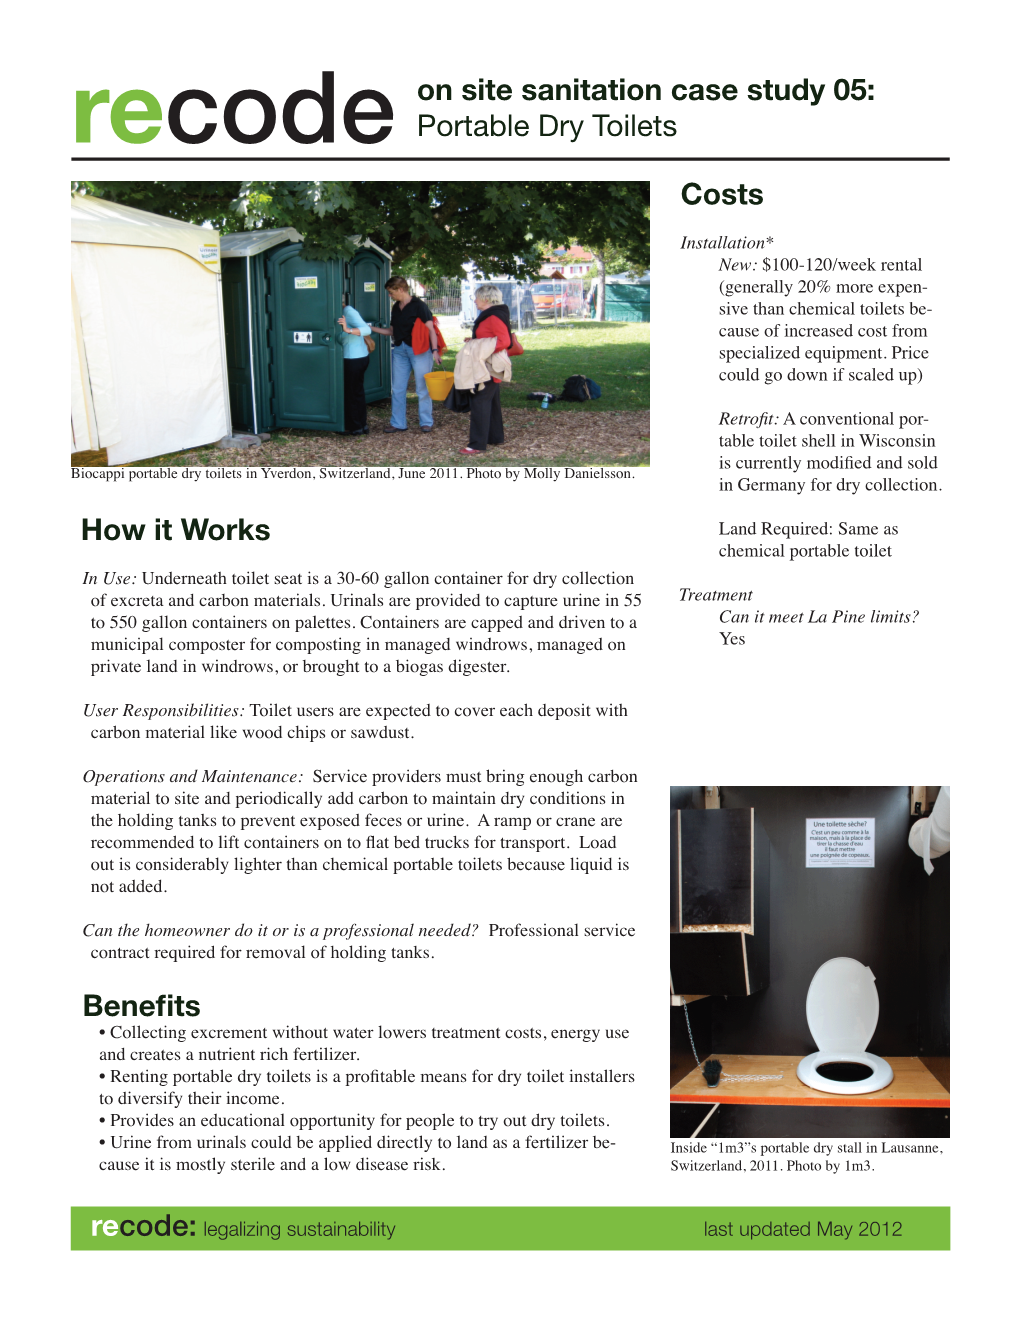 On Site Sanitation Case Study 05: Portable Dry Toilets Implementation in Europe